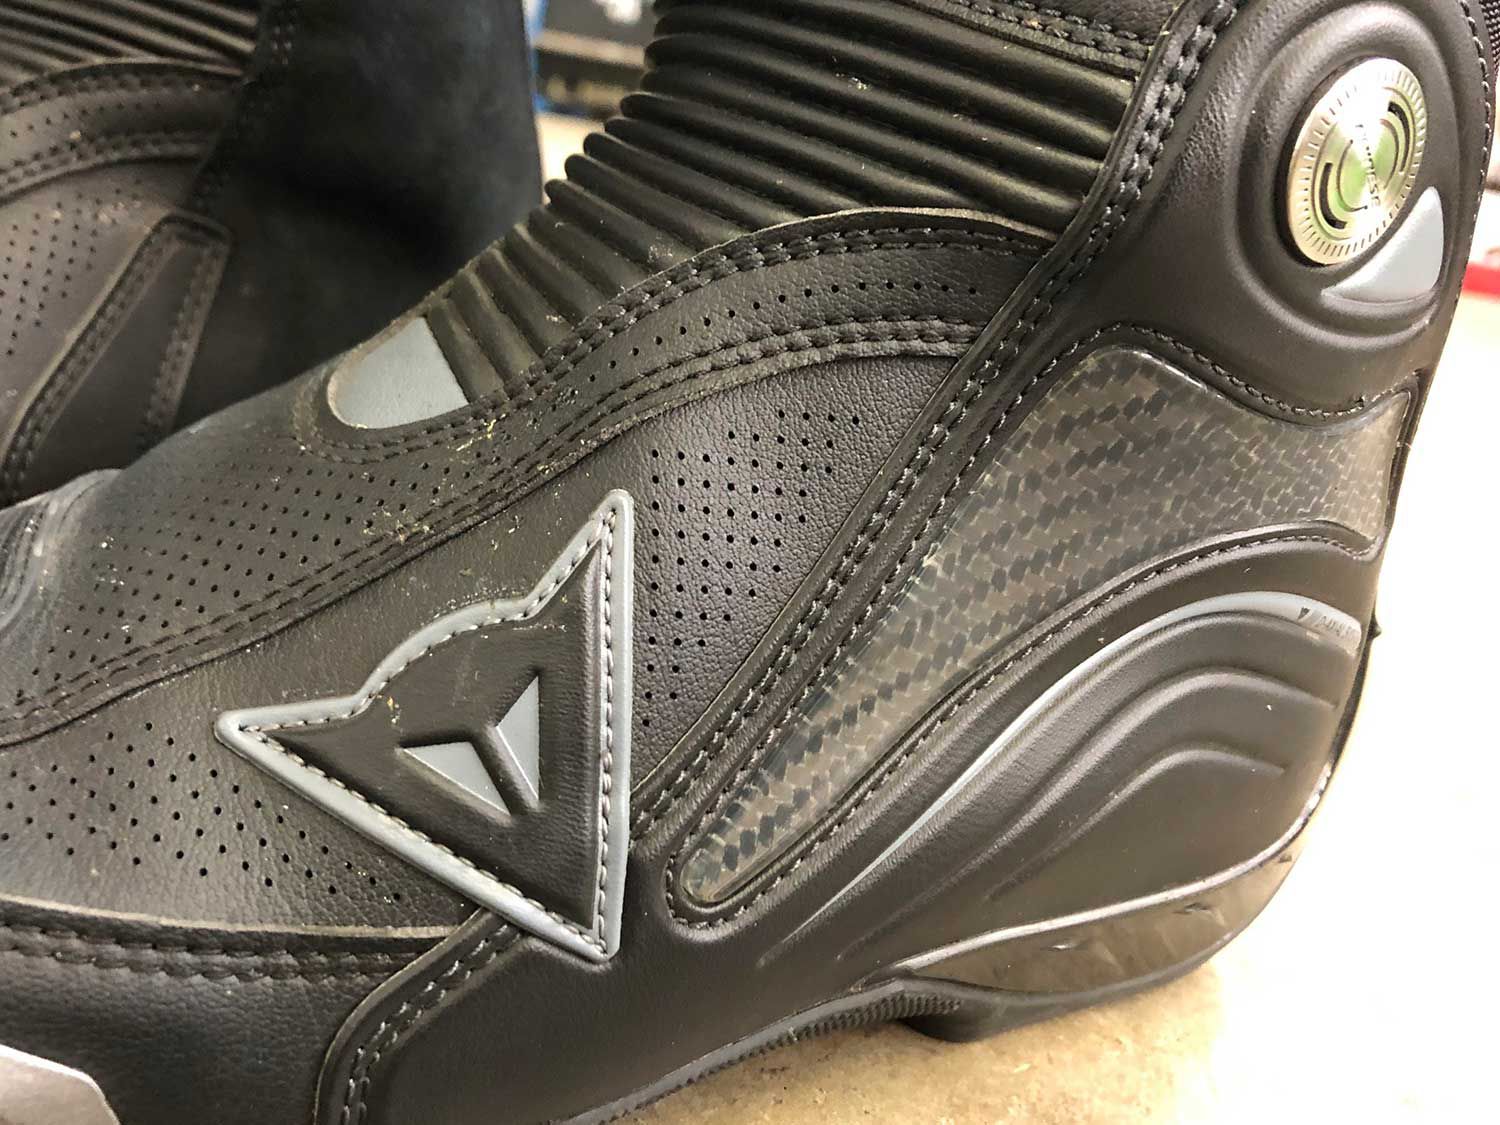 Dainese Axial D1 Boot Review | Cycle World